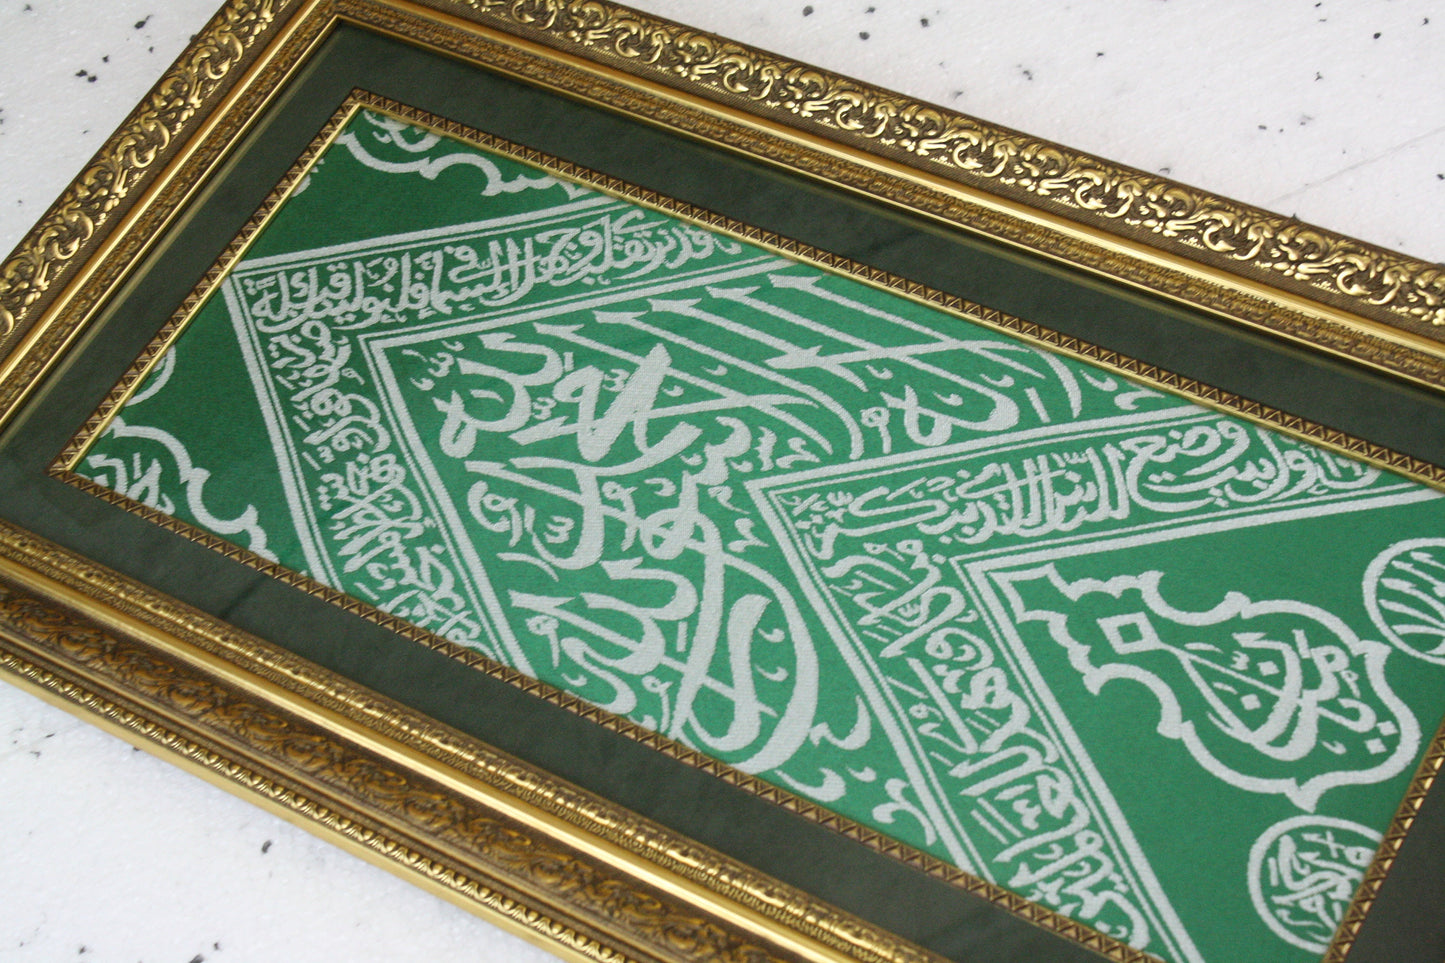 The Most Precious Meaningful Gift For Muslim Family - The Covering Cloth Of Inside Of blessed Holy Kaabah / Frame Islamic Relic Decor